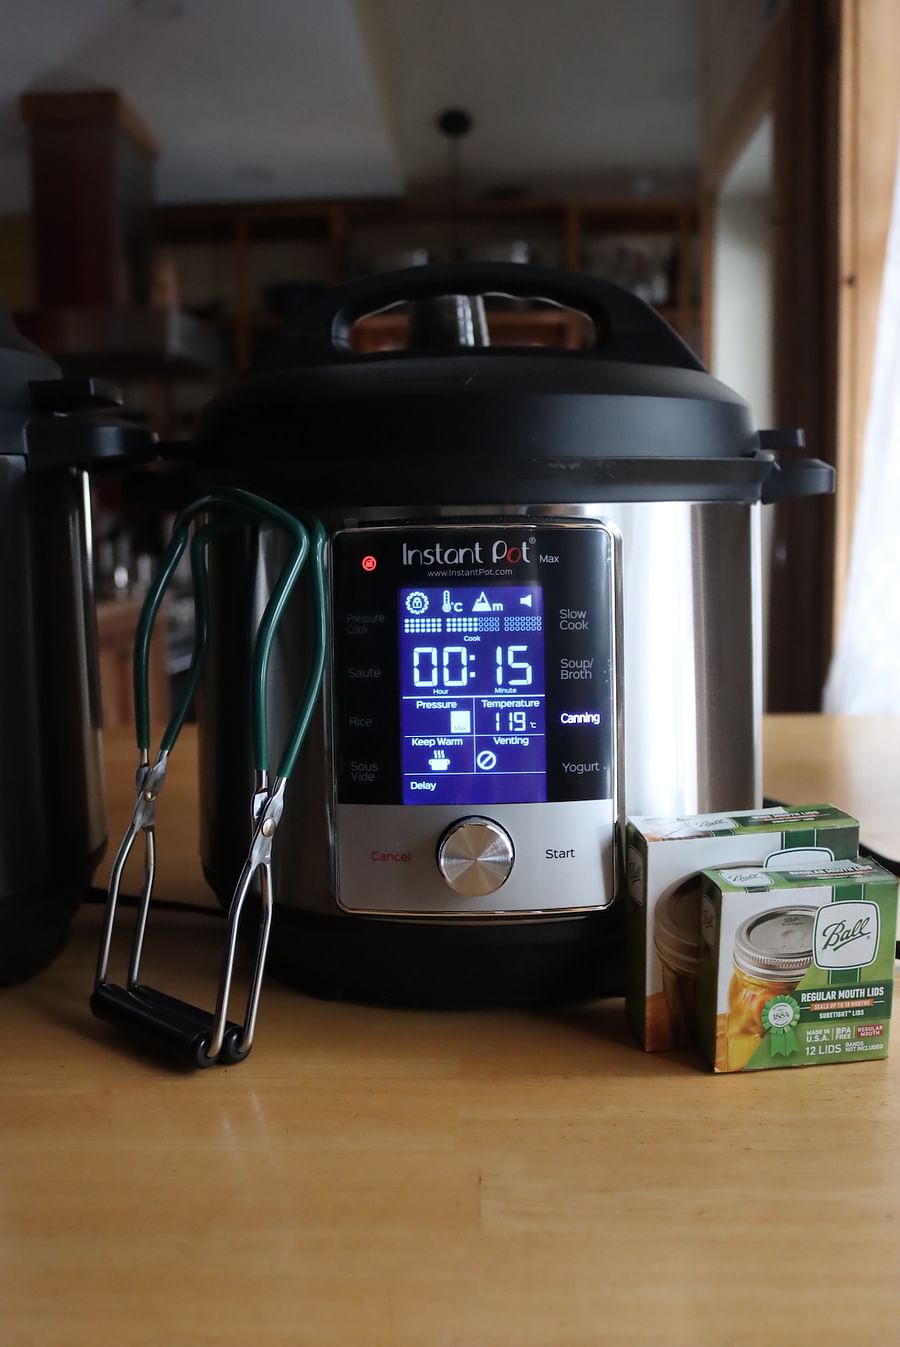 Instant Pot with canning jars and ingredients ready for preserving